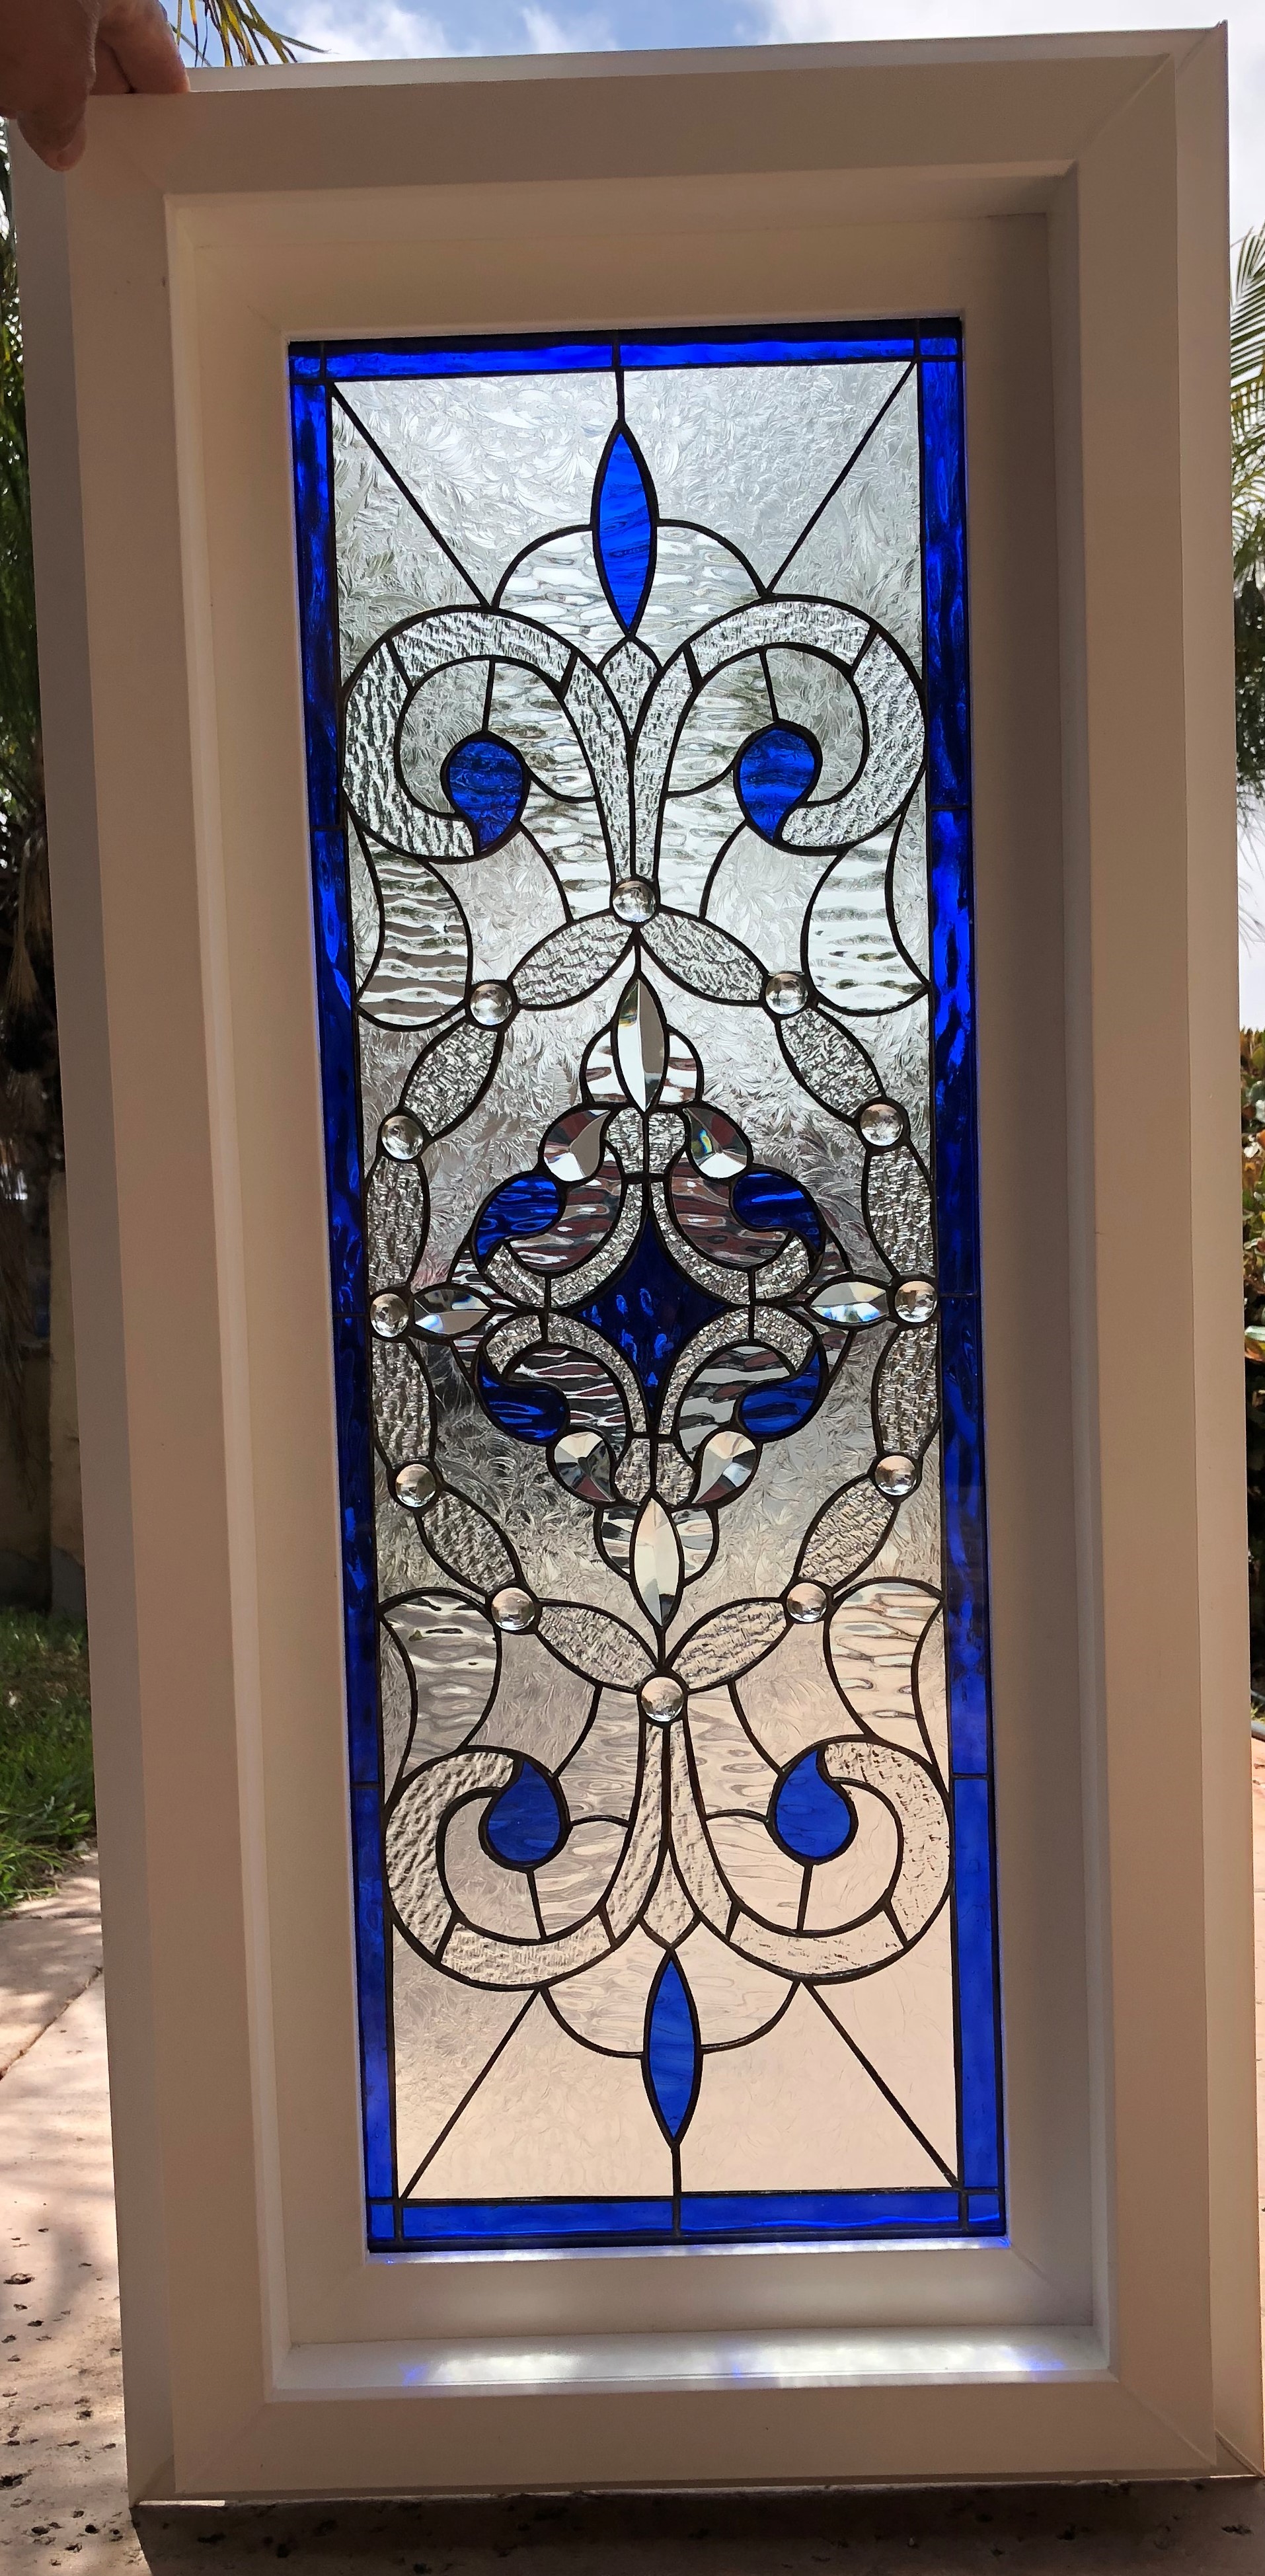 Simply Stunning The “victorville” Stained And Beveled Glass Window In Vinyl Frame